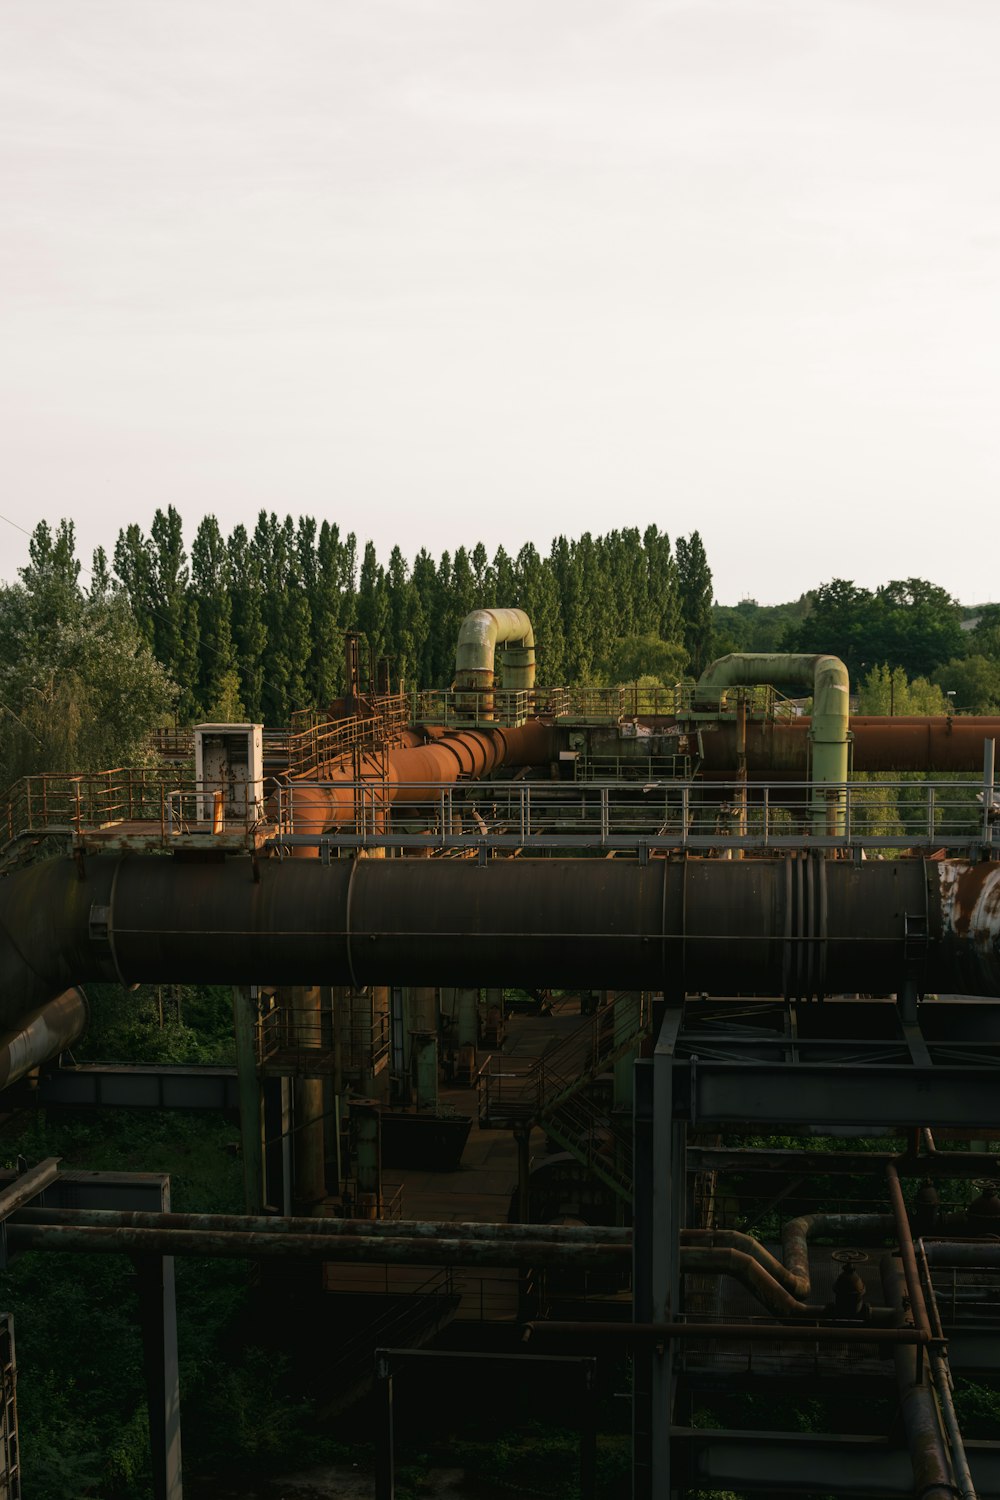 pipes and pipes in an industrial area with trees in the background